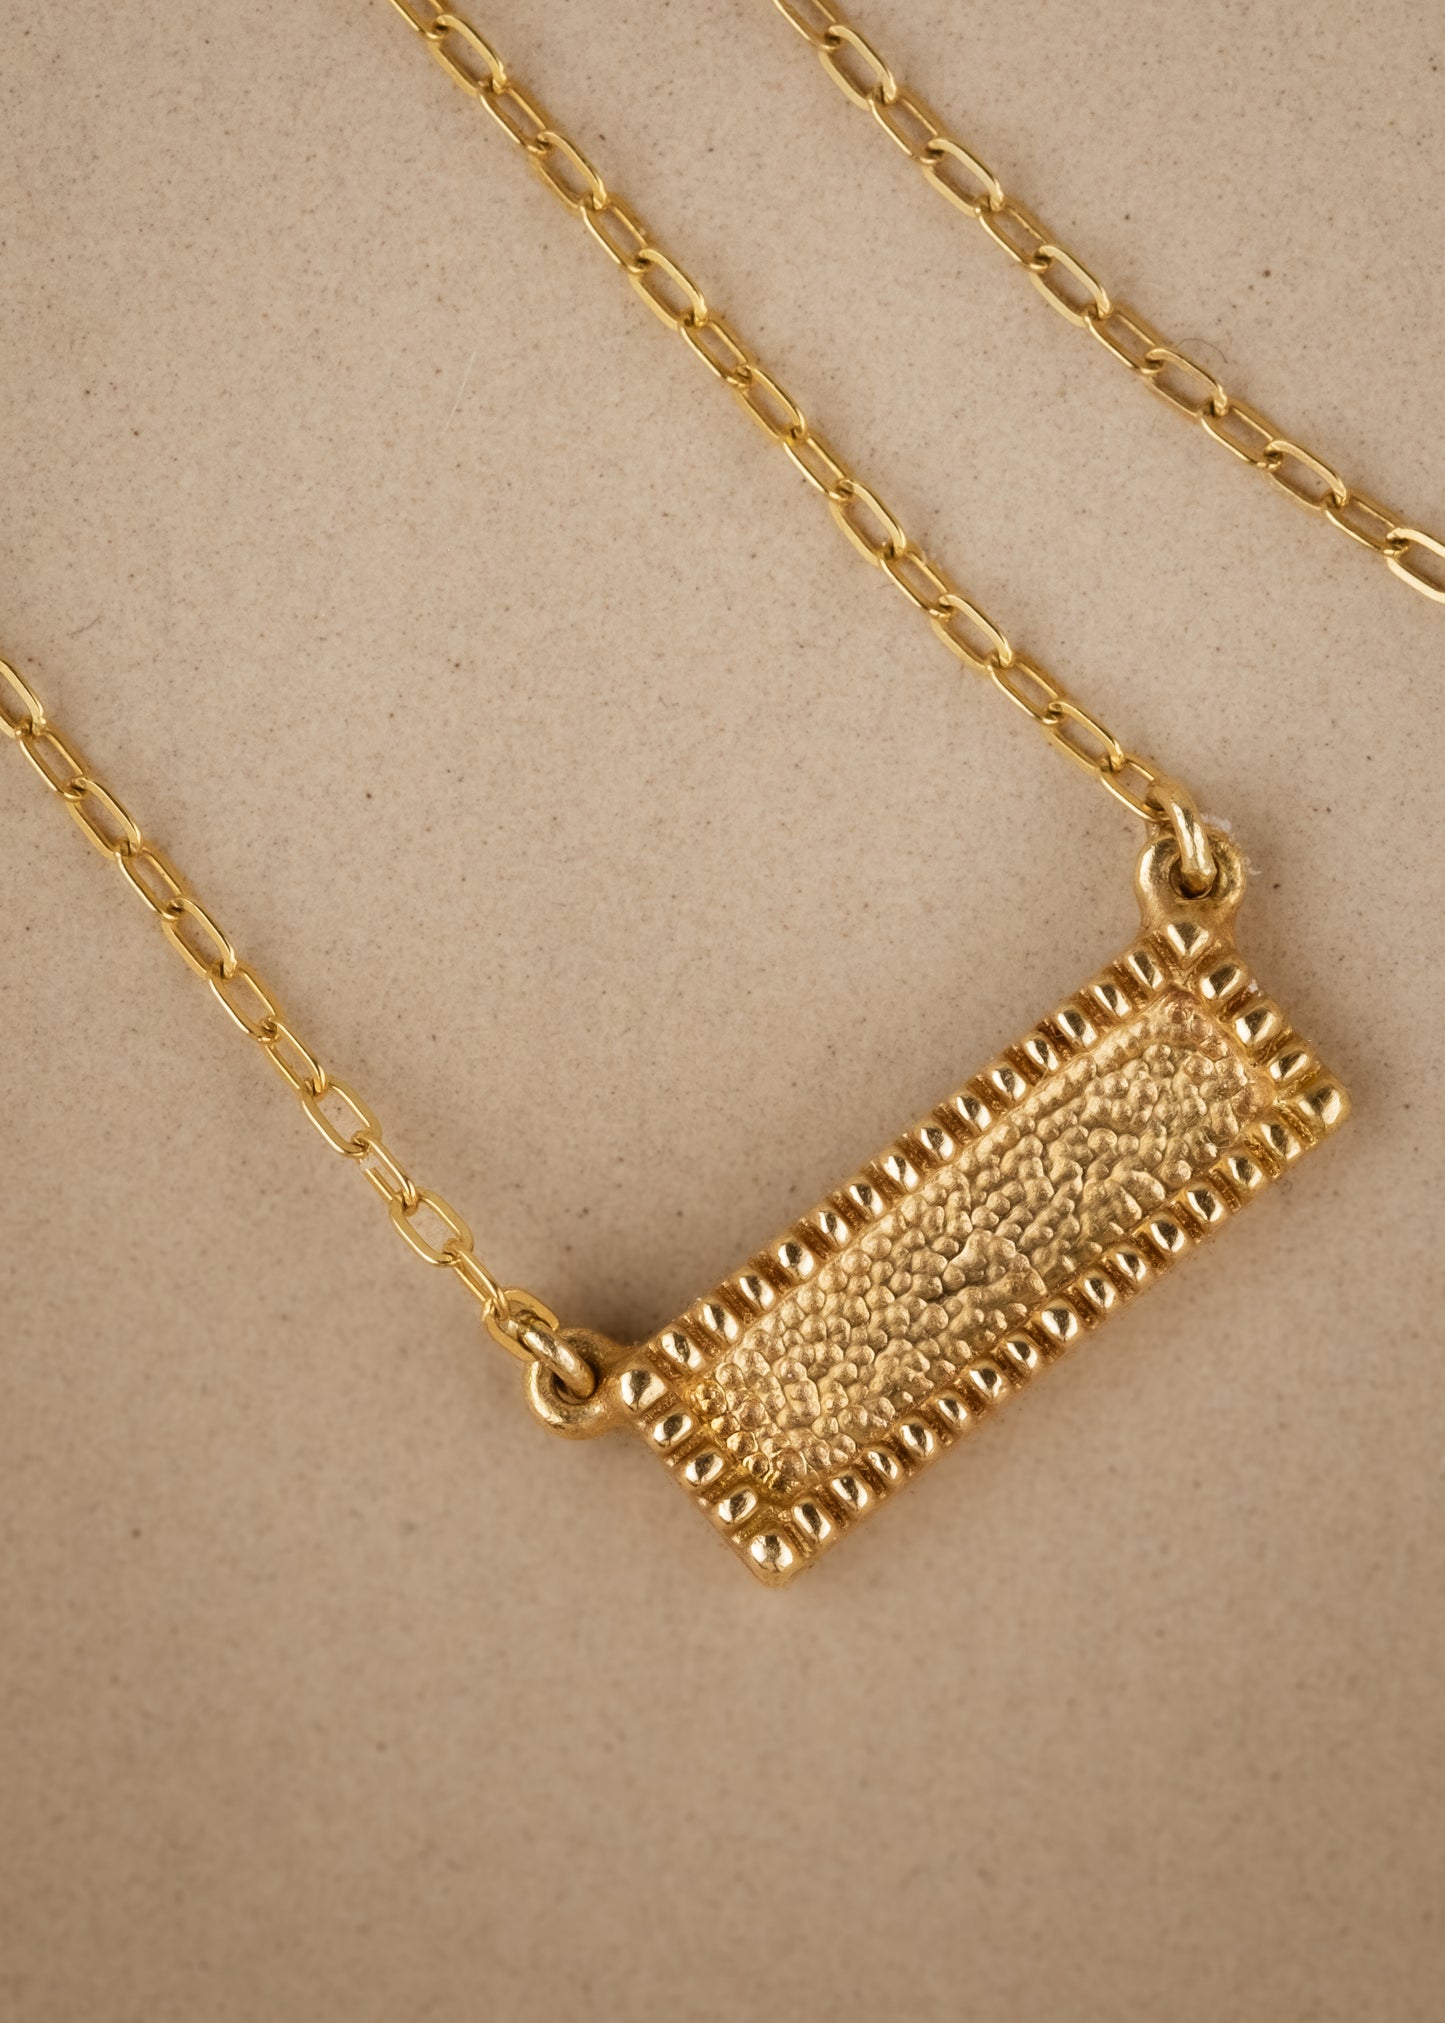 Let the details that speak to you come into focus. The Frame necklace is a study in craftsmanship, at once delicate and substantial. Beaded framework surrounds textured gold for a timeless and eye-catching necklace.